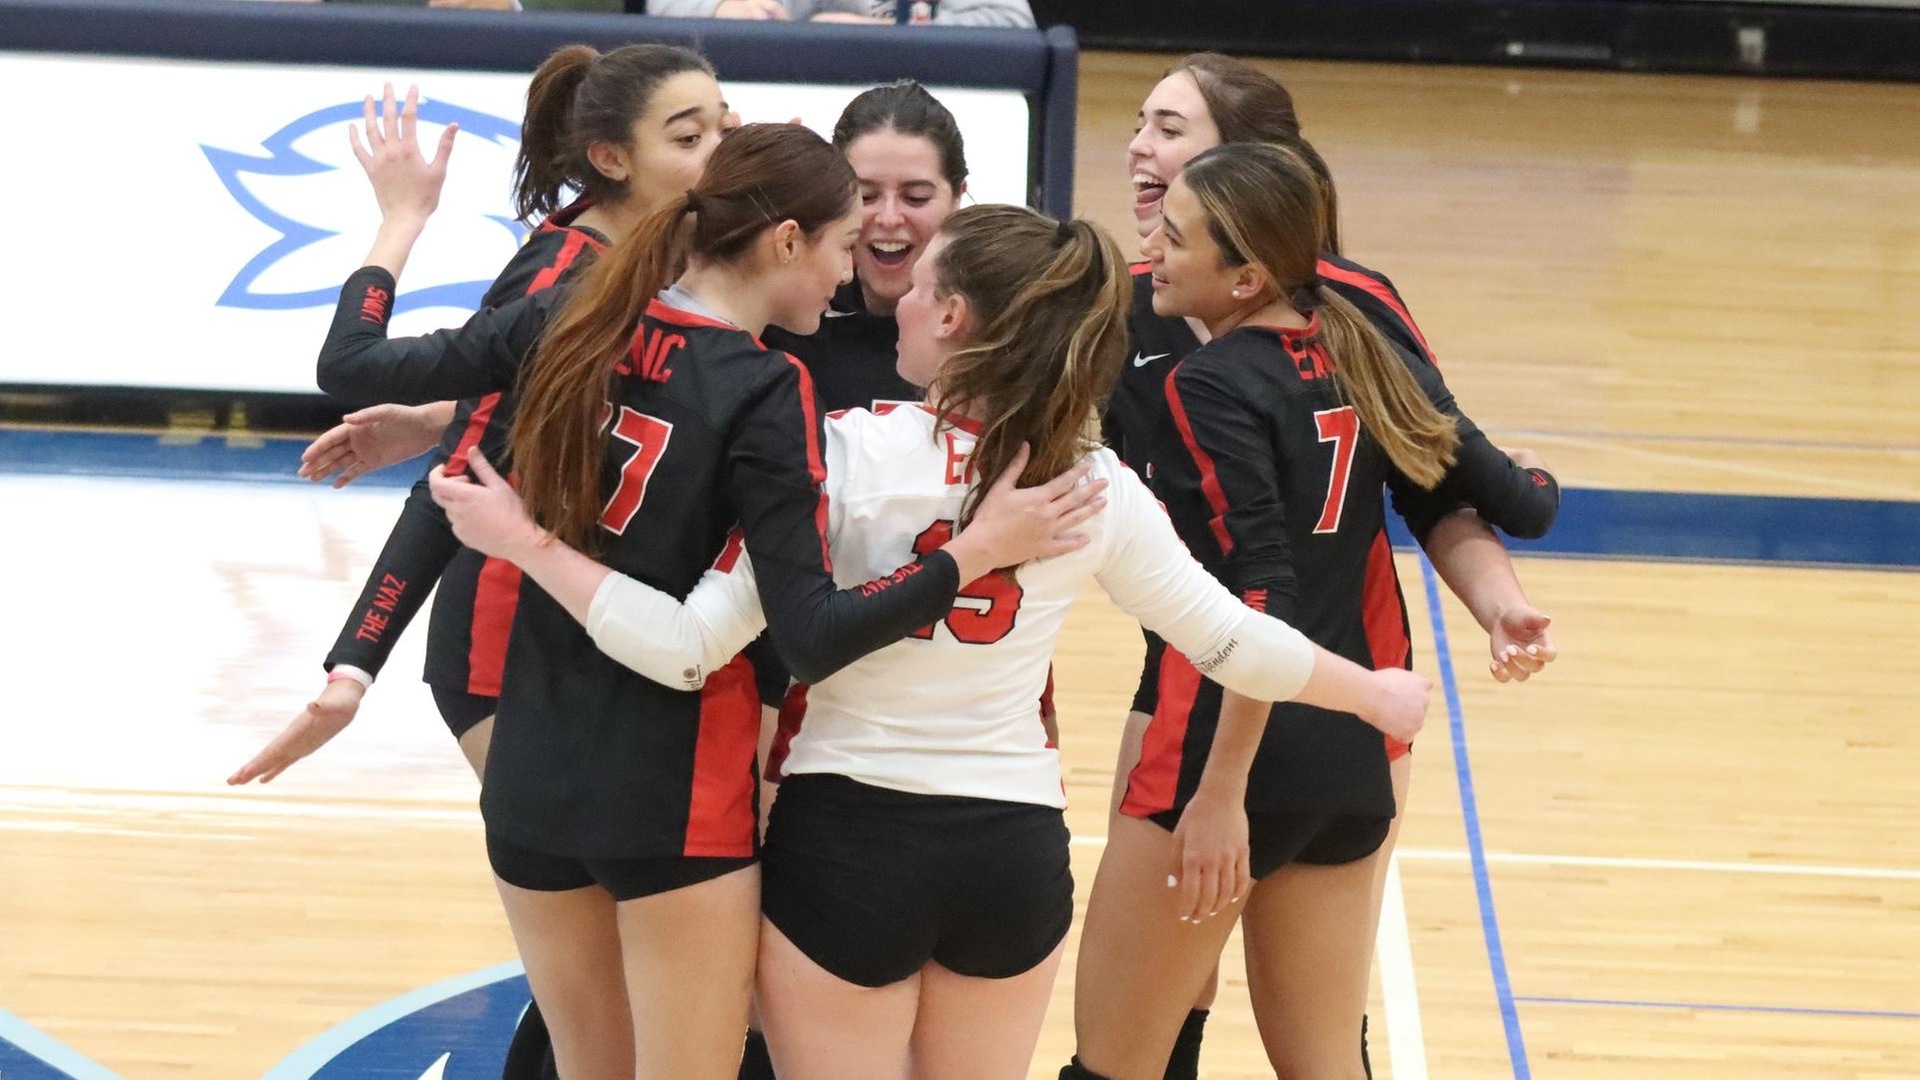 Women’s Volleyball Scores First Win Over Roger Williams Since 2006, Triumphs 3-1 in Regular-Season Finale